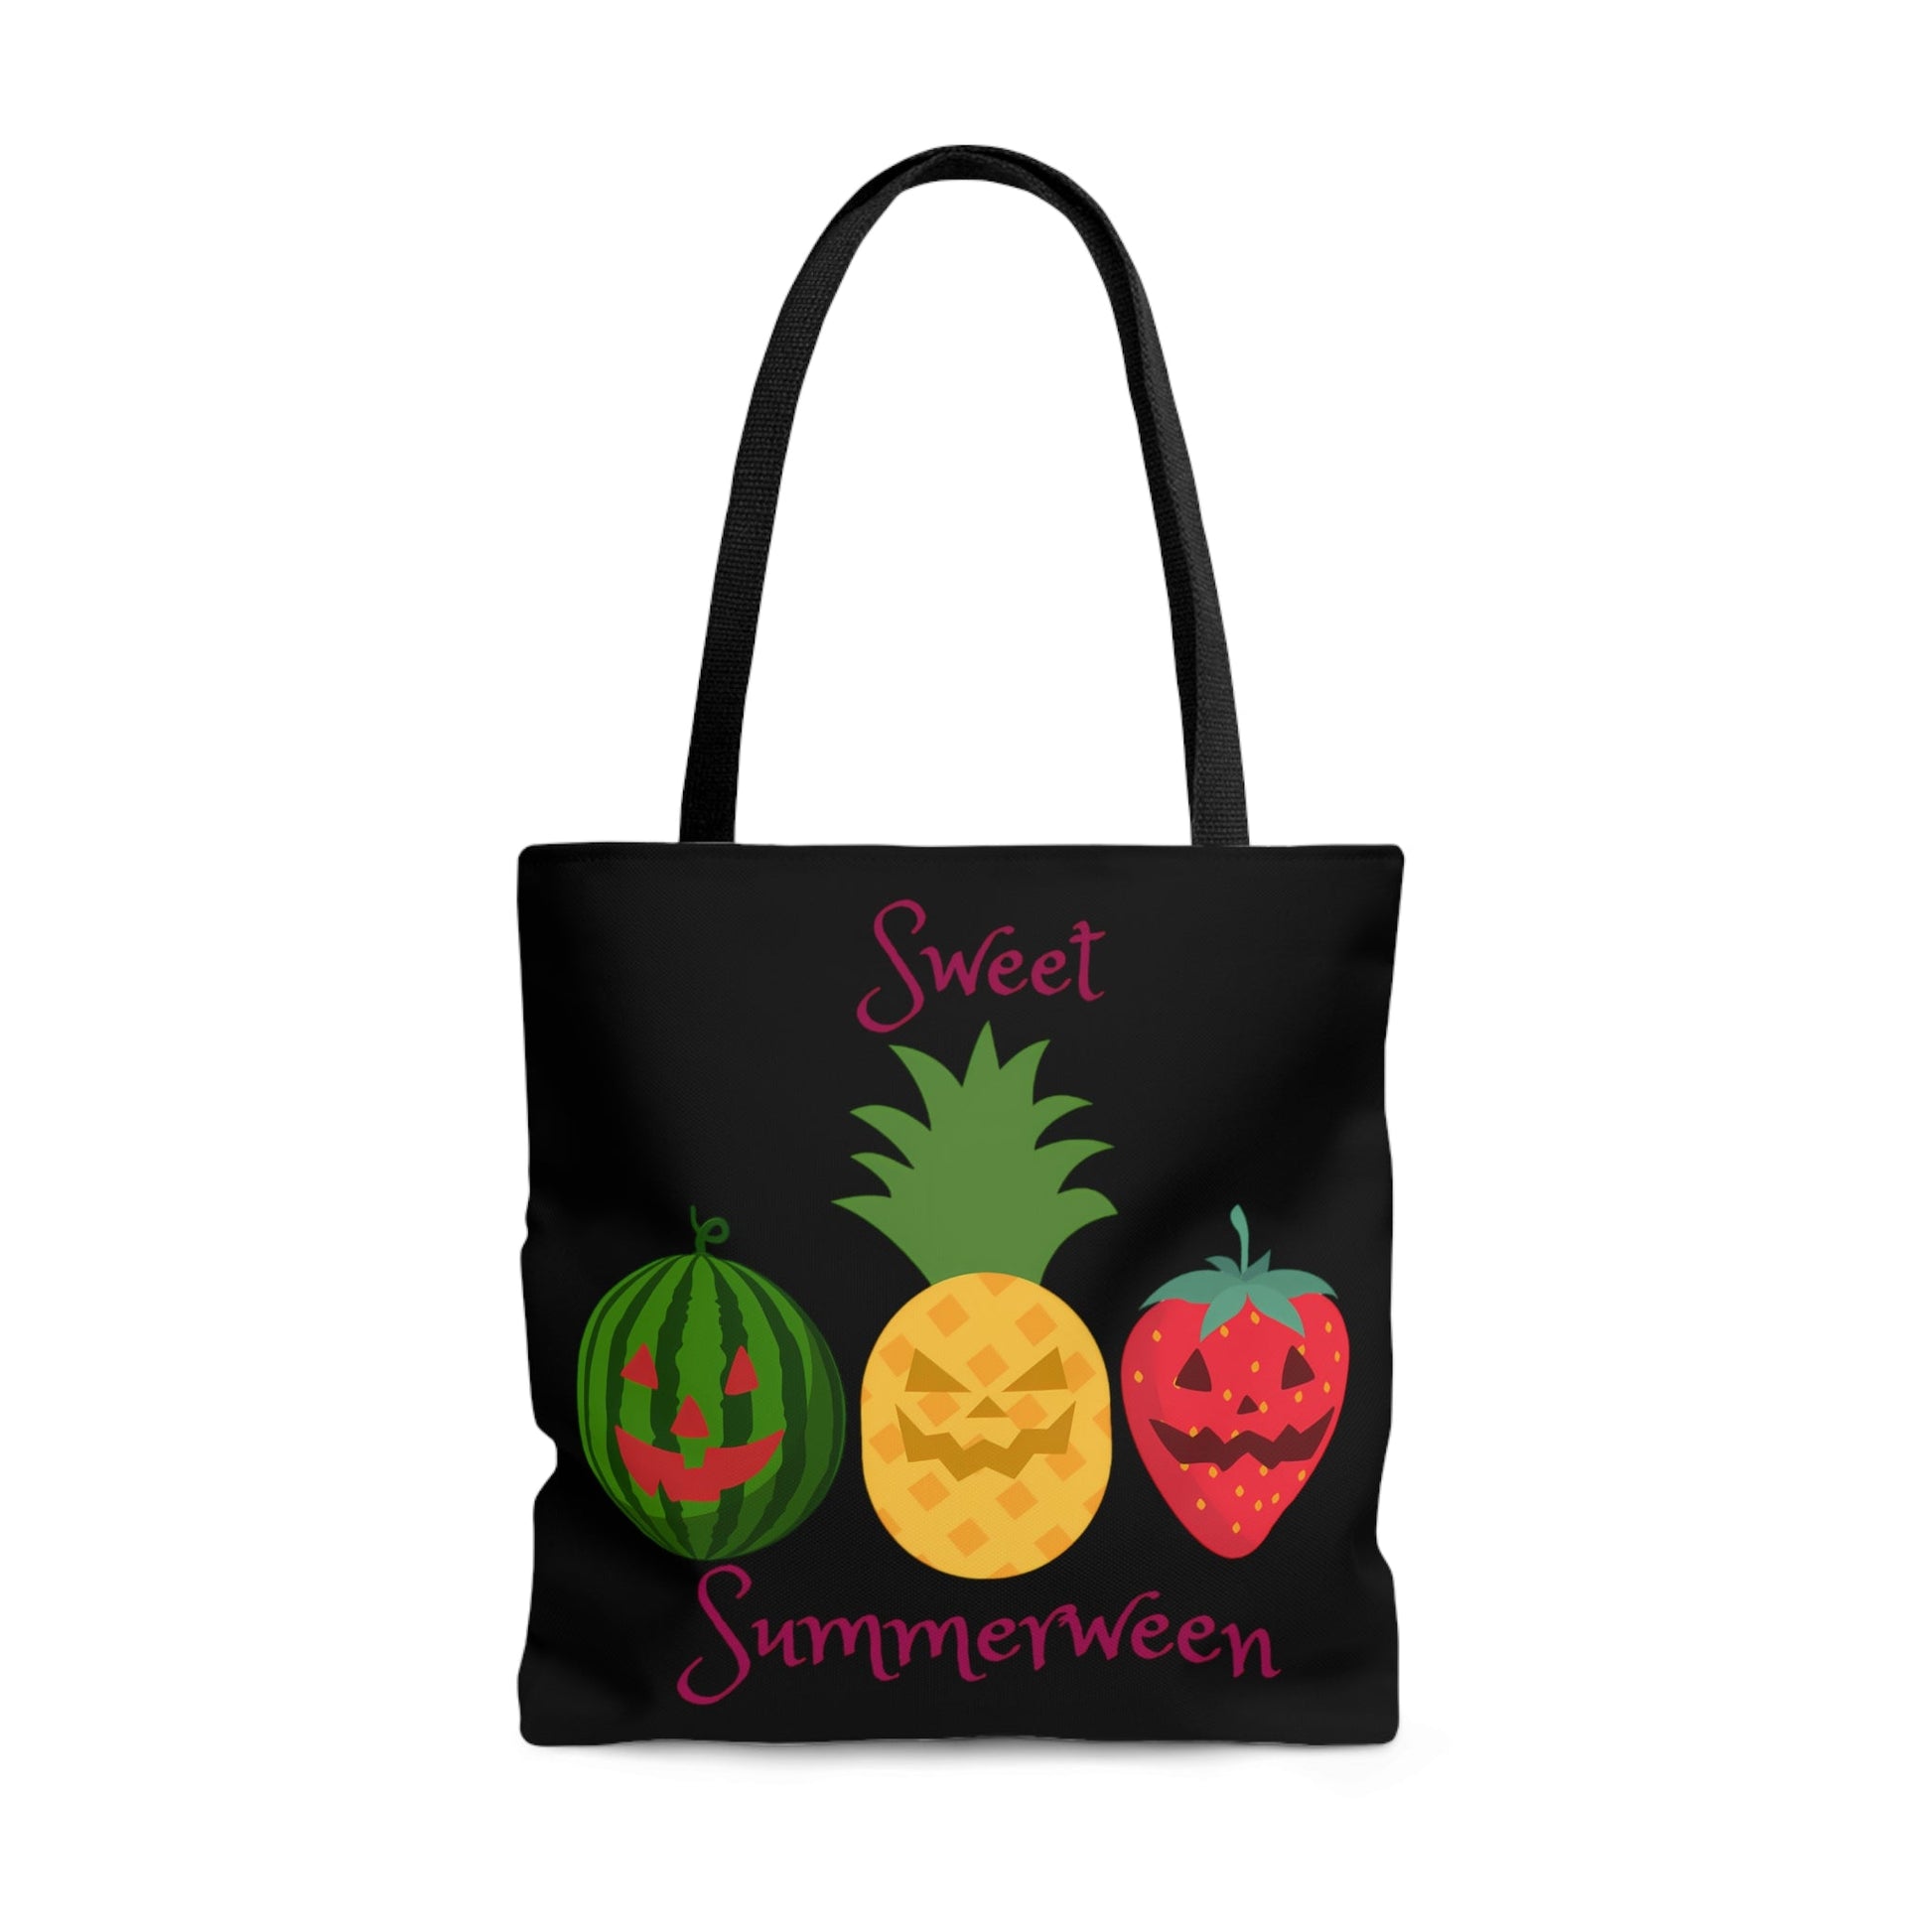 Sweet Summerween Tote BagBagsVTZdesignsLargeAccessoriesAll Over PrintAssembled in the USA